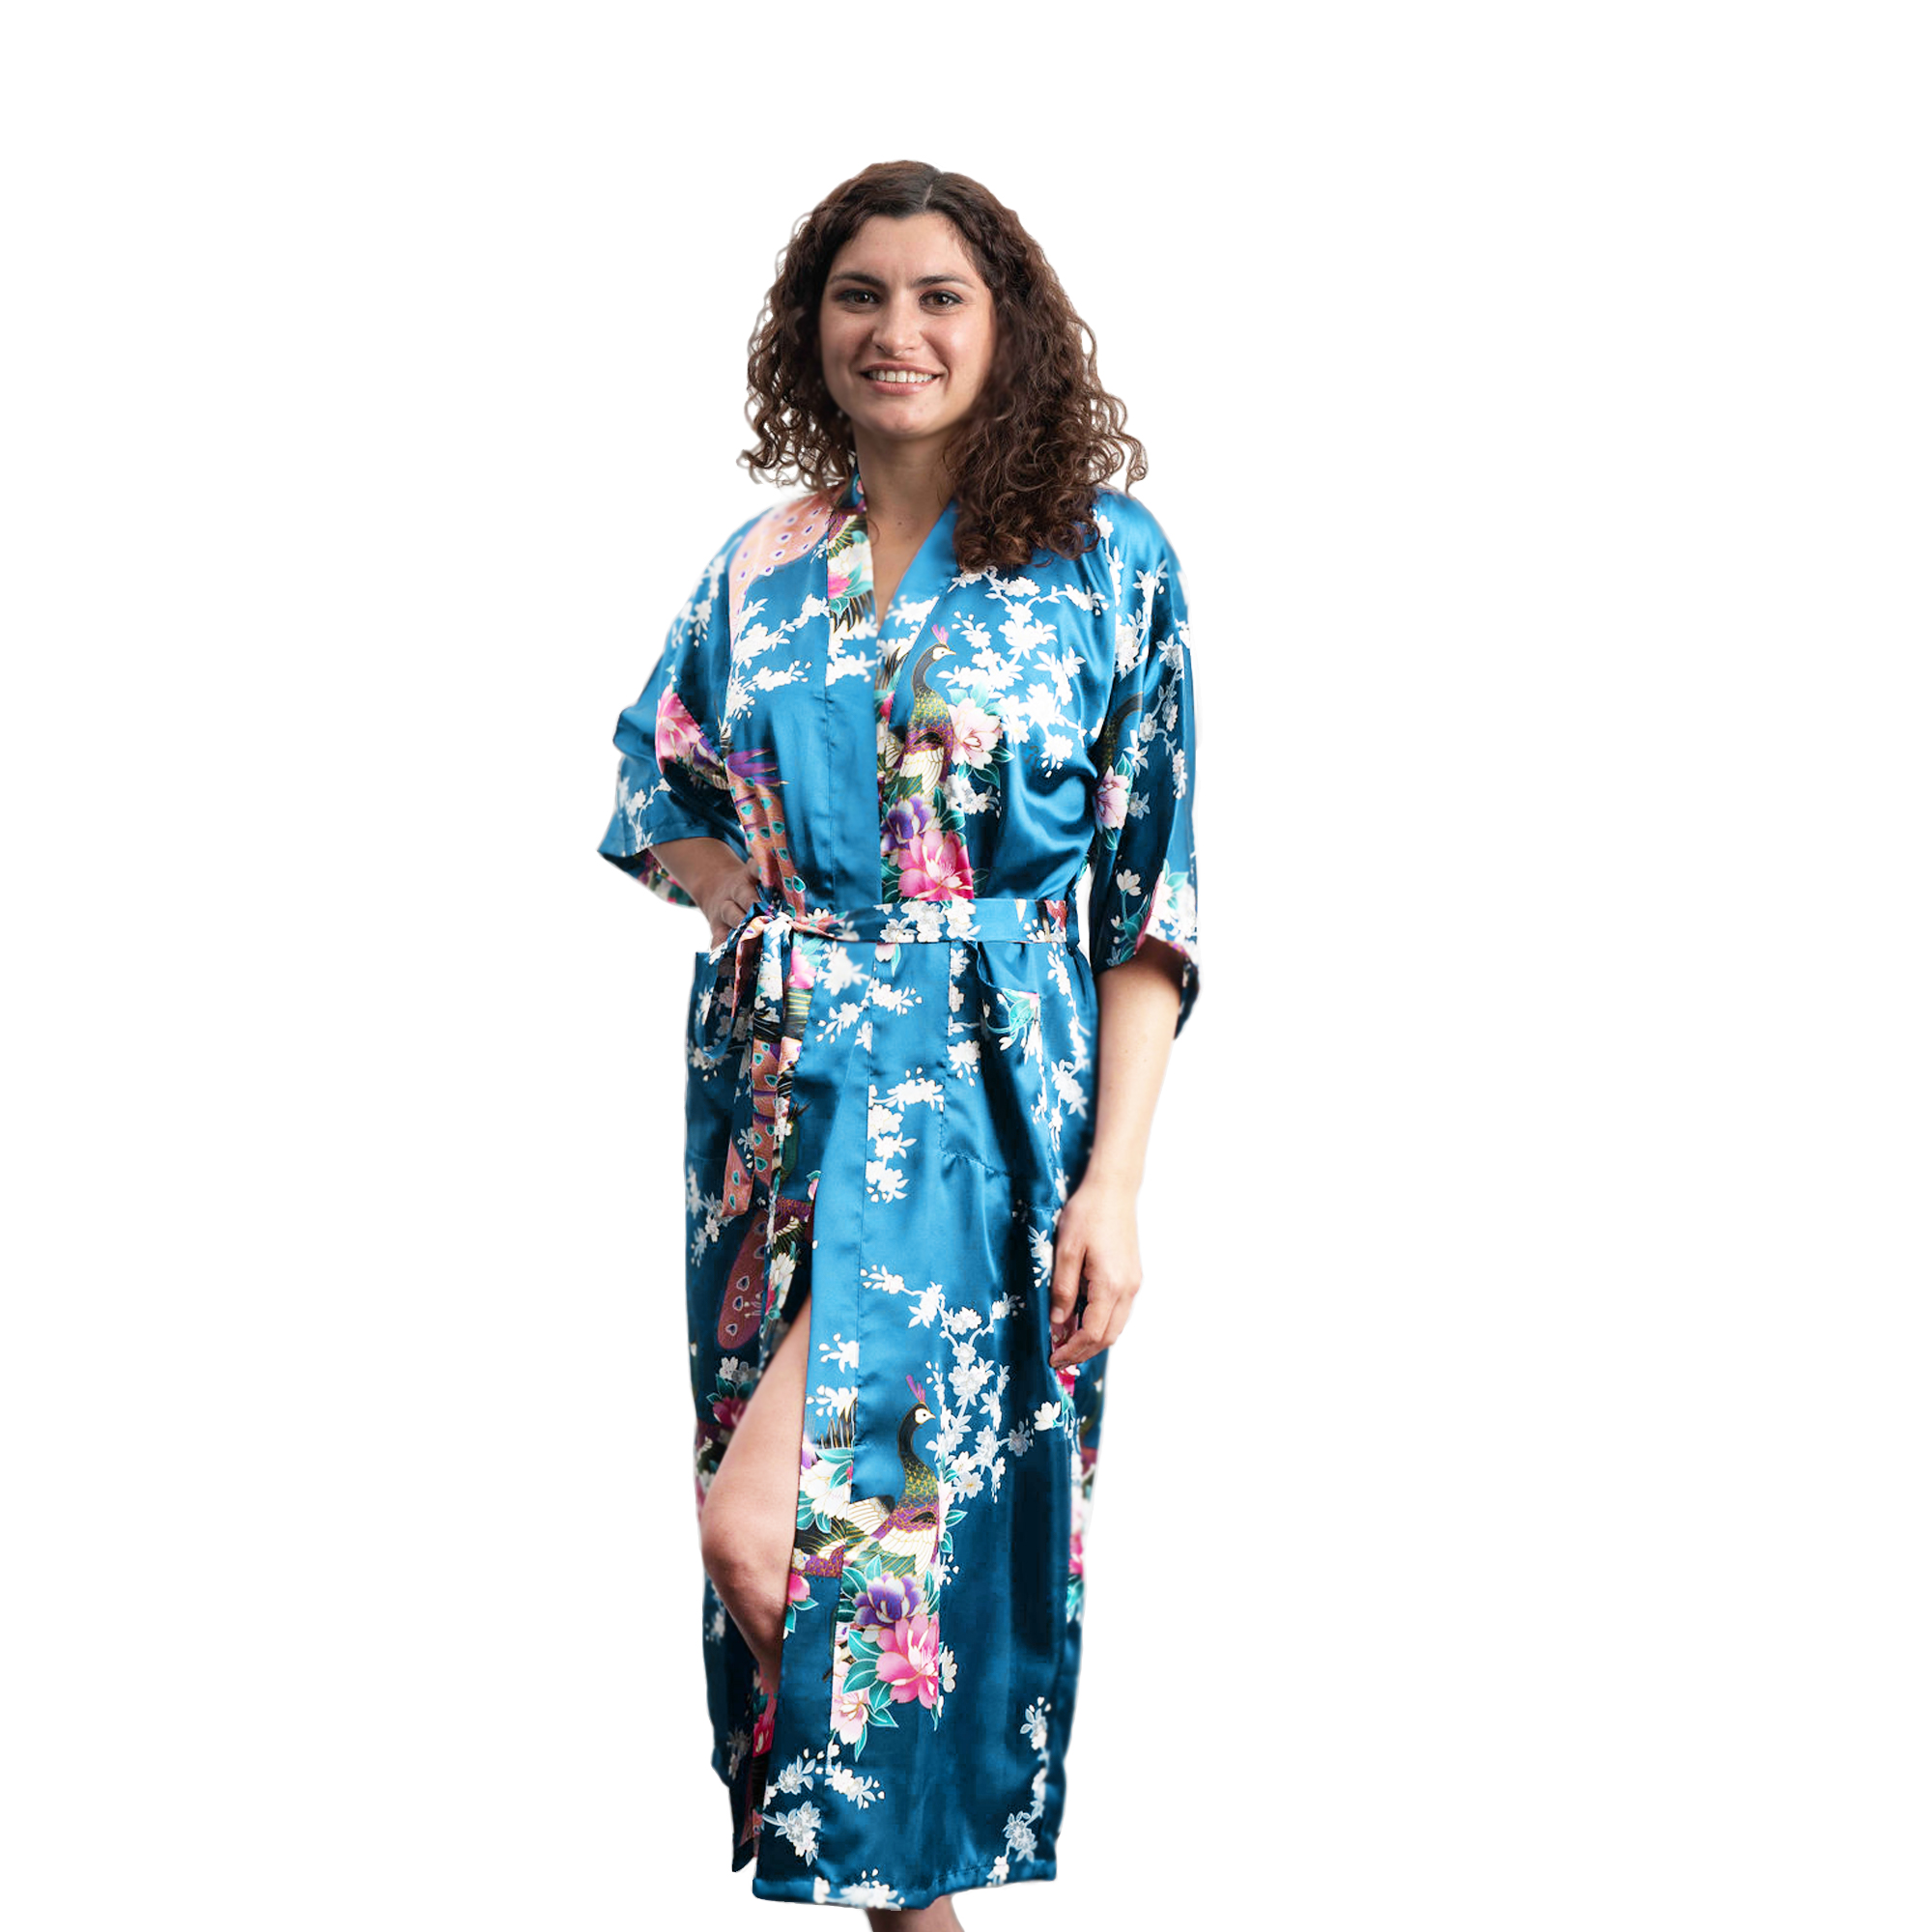 Gifts Are Blue Elegant Long Floral Silk Kimono Womens Robe, Sizes 2 to 18 - Lightweight Floral Women's Robe